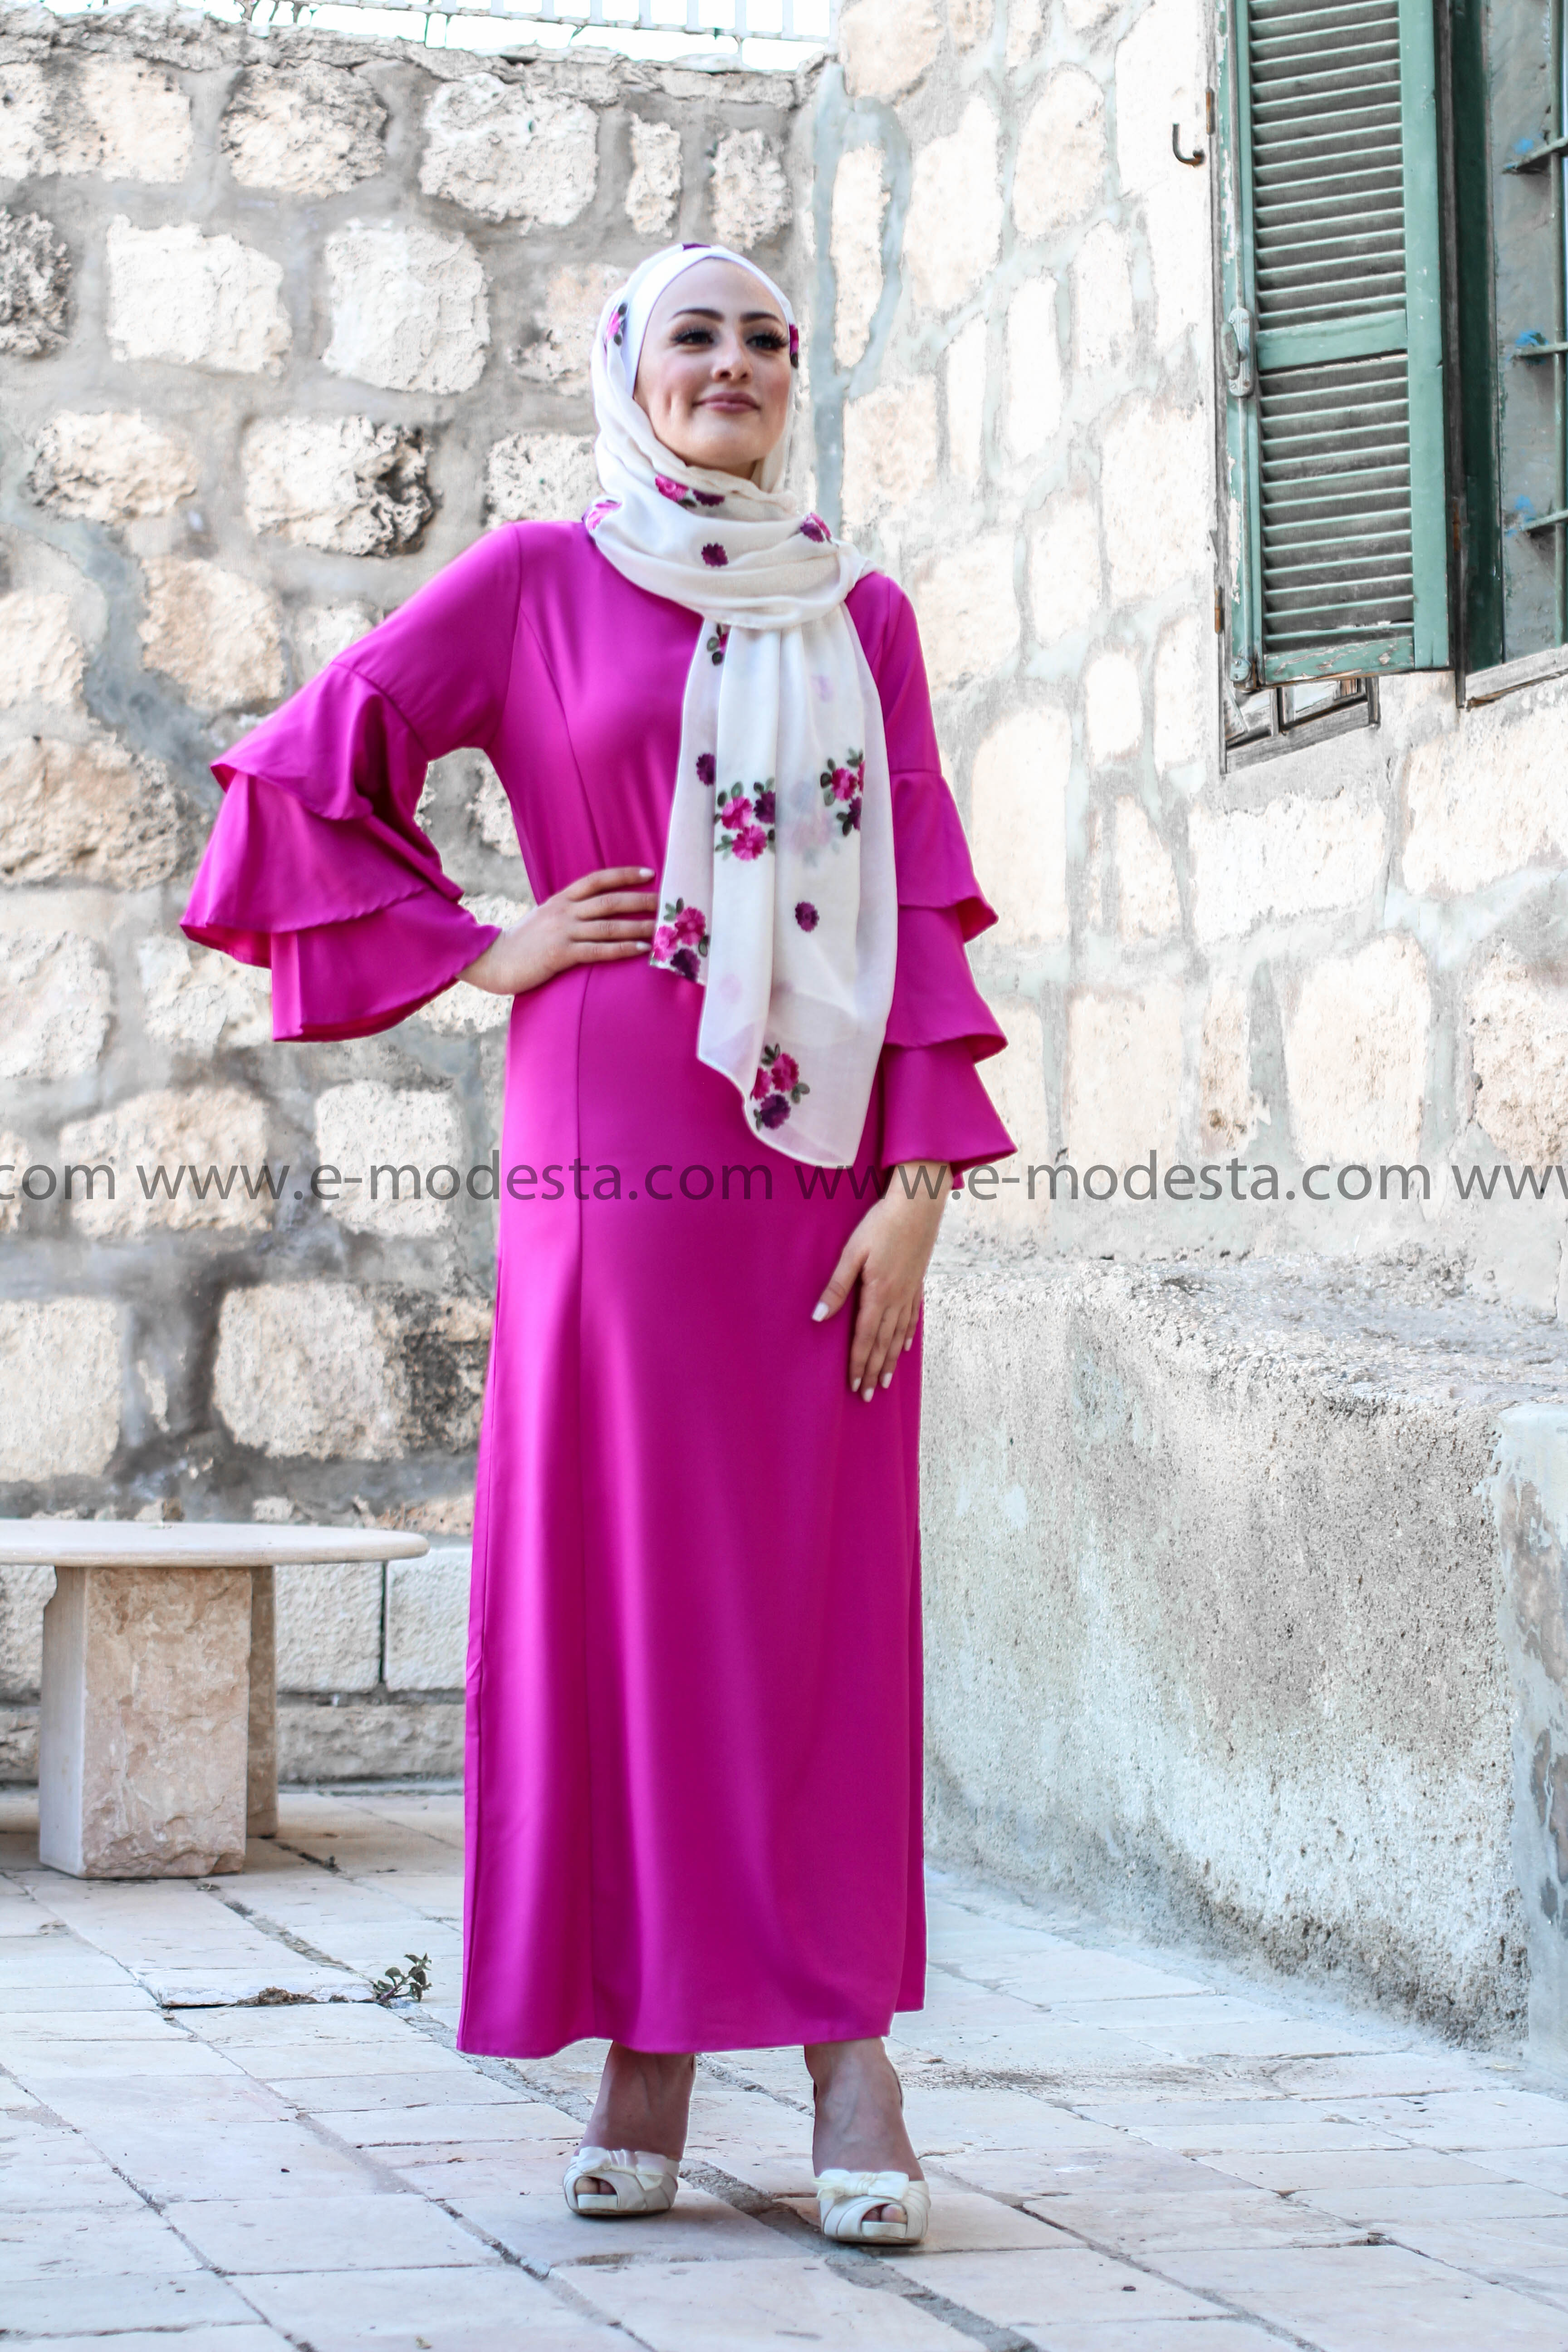 SALE | Solid Color Maxi Dress with Ruffled Sleeve - E-Modesta